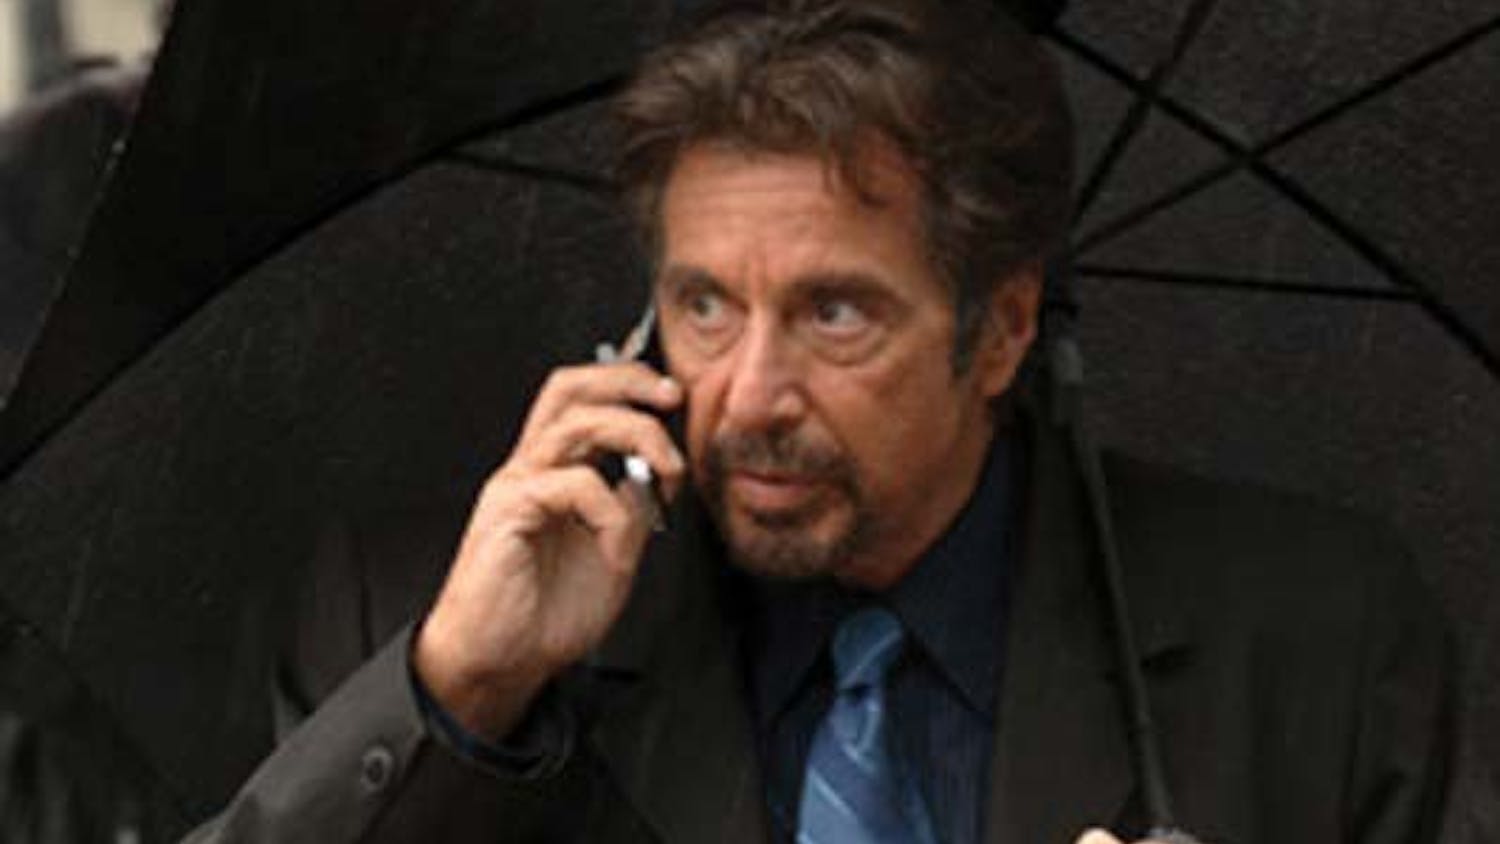 Al Pacino stars in TriStar Pictures' thriller 88 MINUTES.